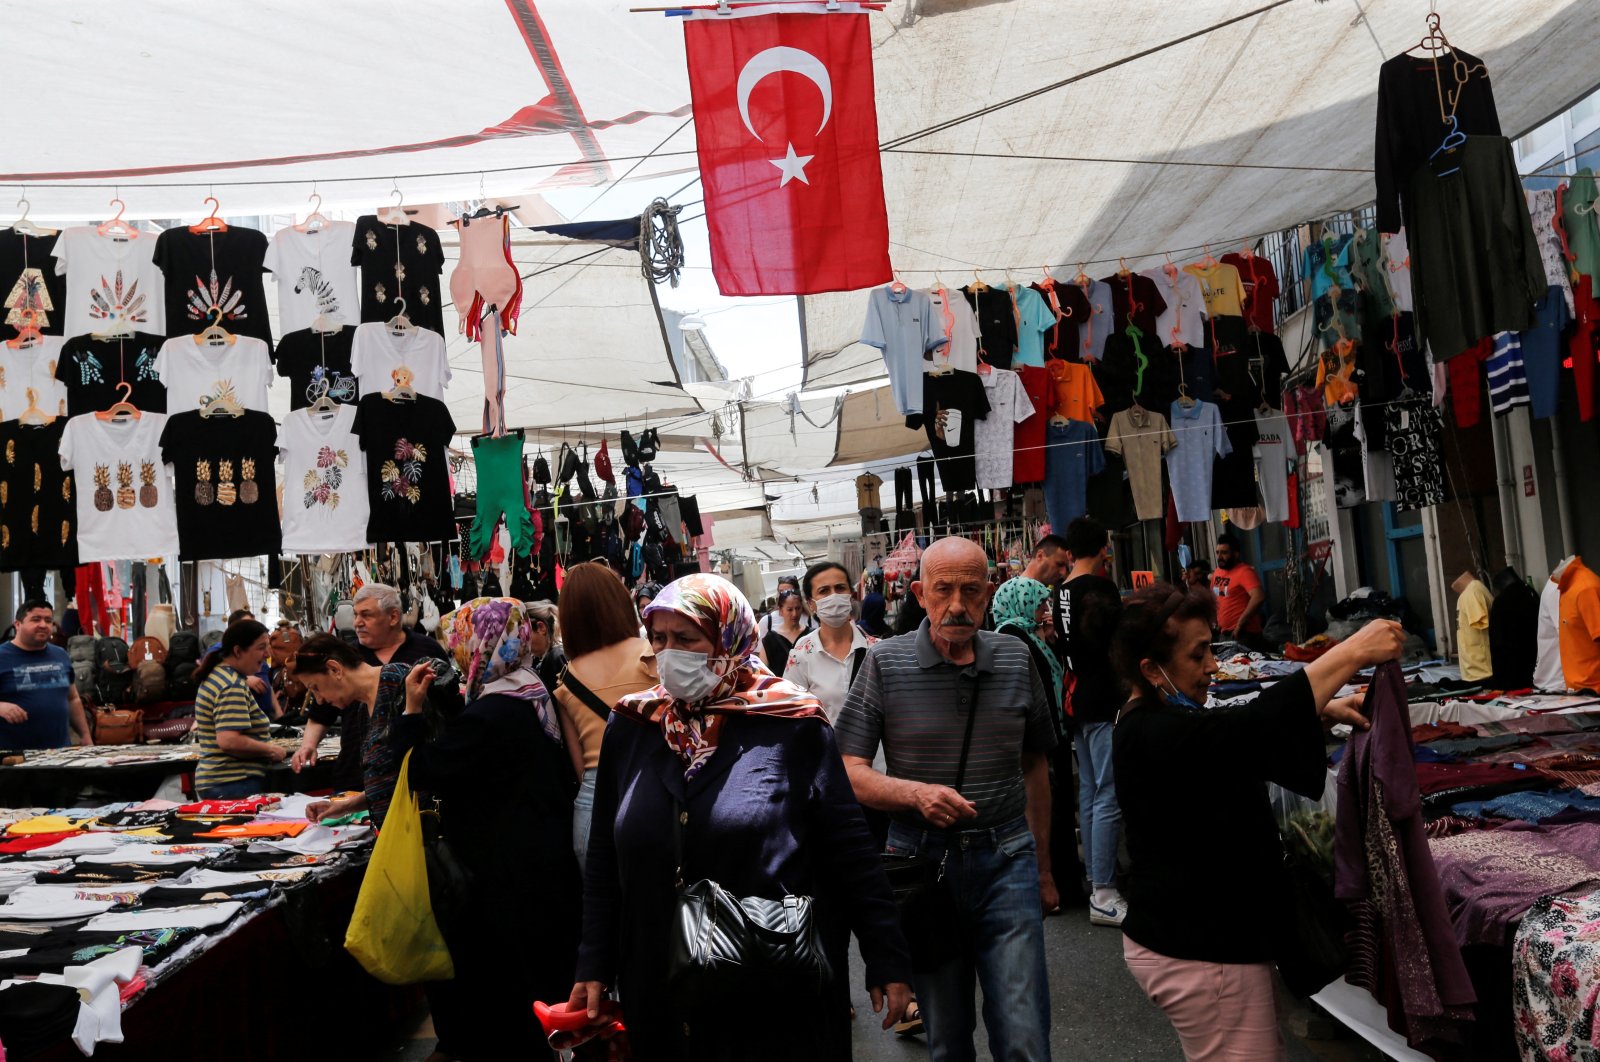 People shop at a market in Istanbul, Turkey, June 10, 2022. (Reuters Photo)